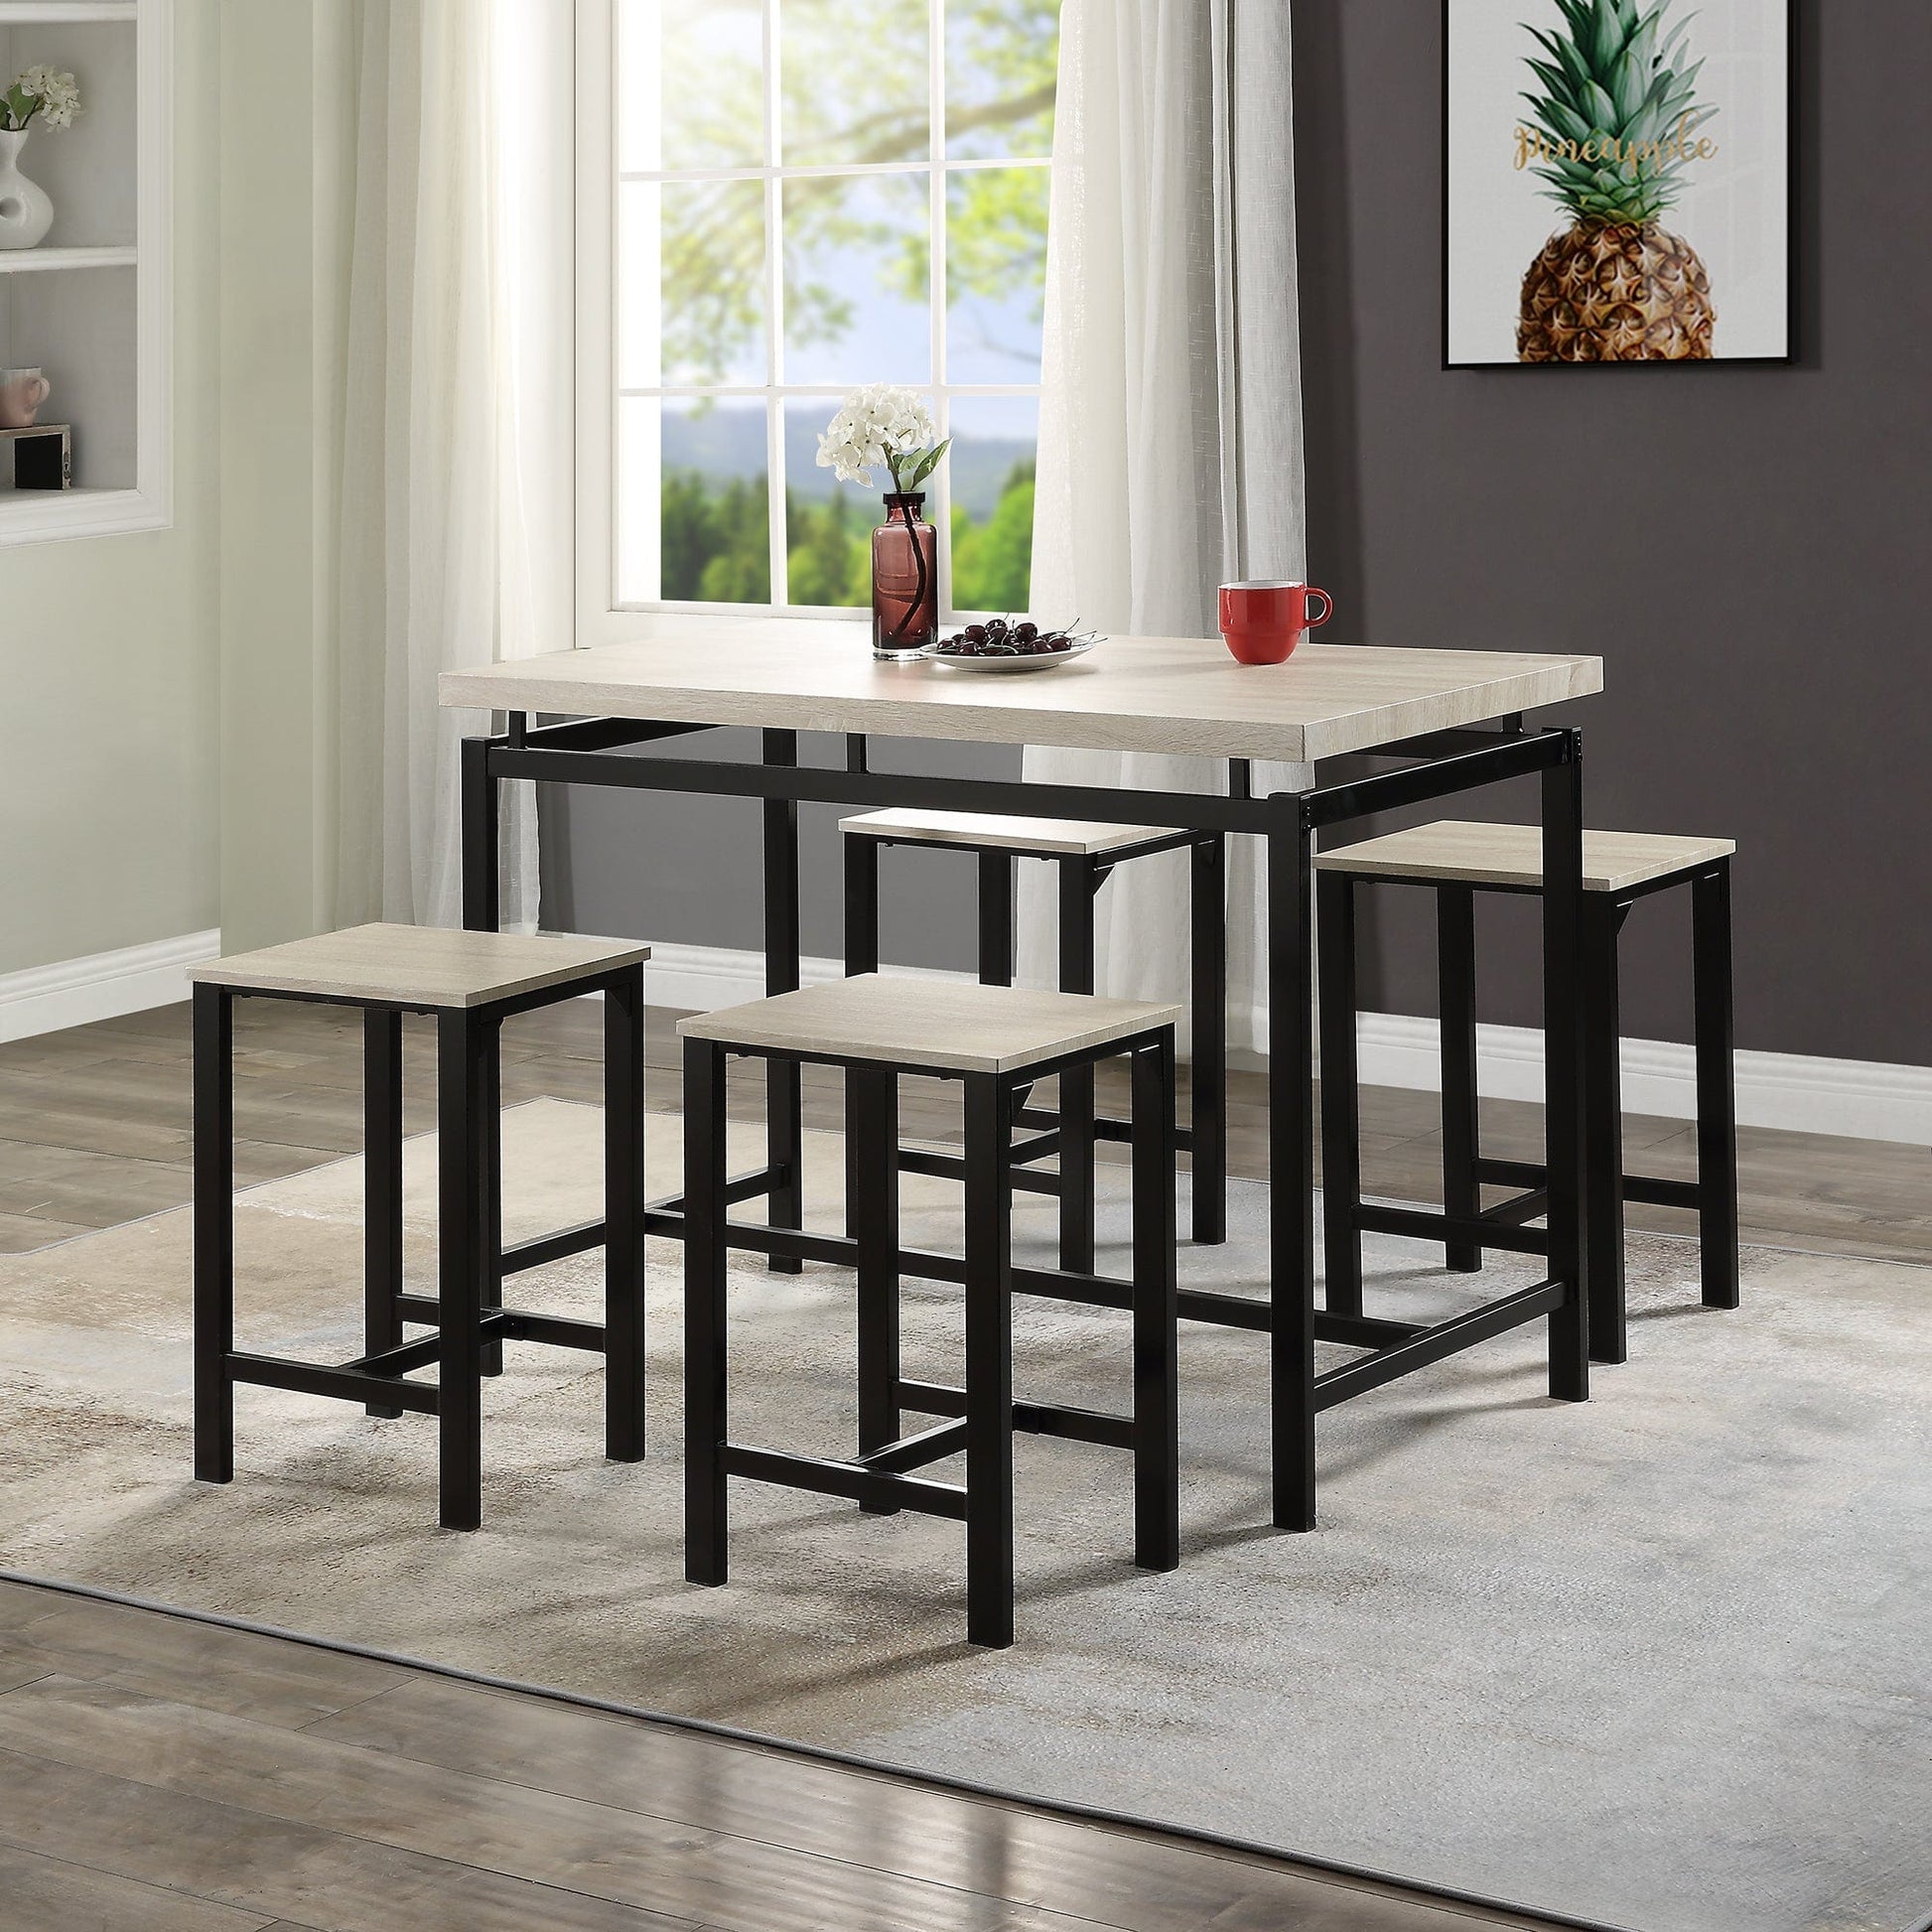 1st Choice Furniture Direct Table Set 1st Choice Modern 5 Pieces Dining Table Counter Chair Set